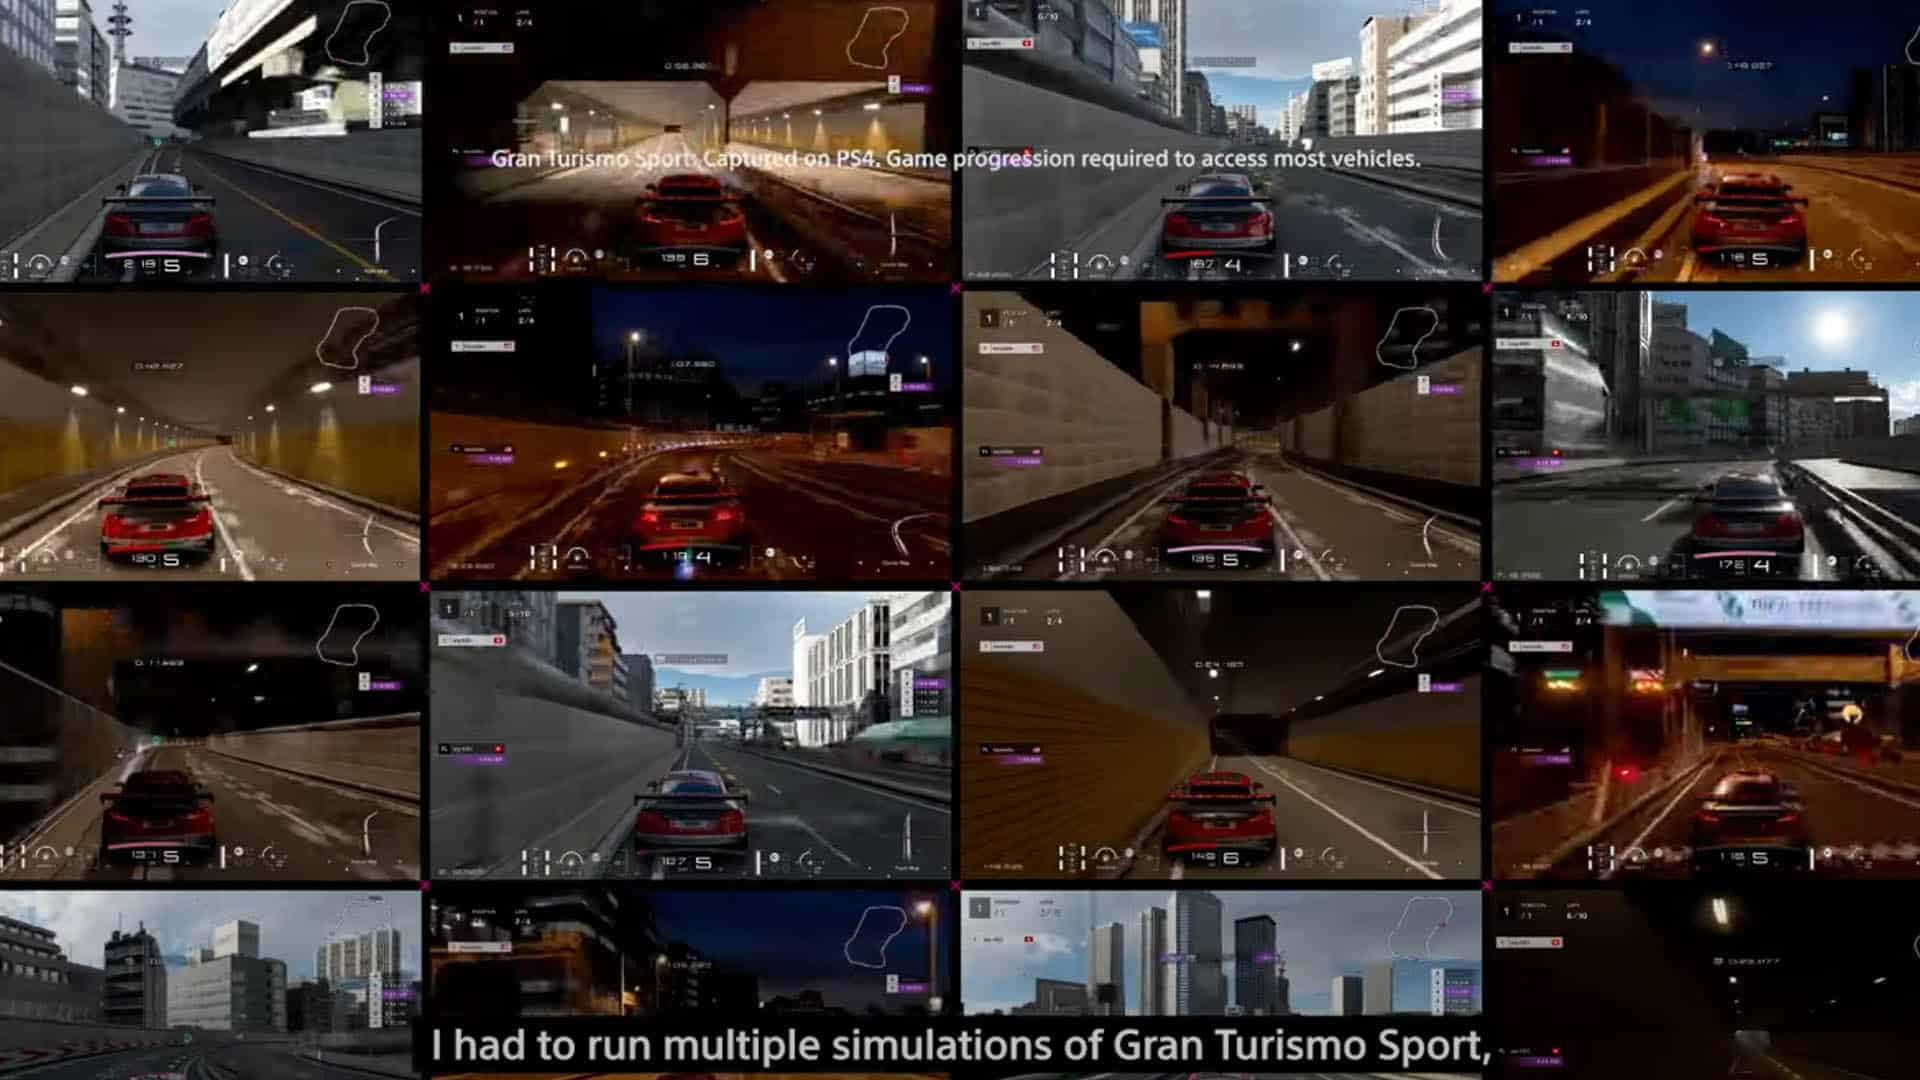 Gran Turismo Sophy AI project was initially a skunkworks project